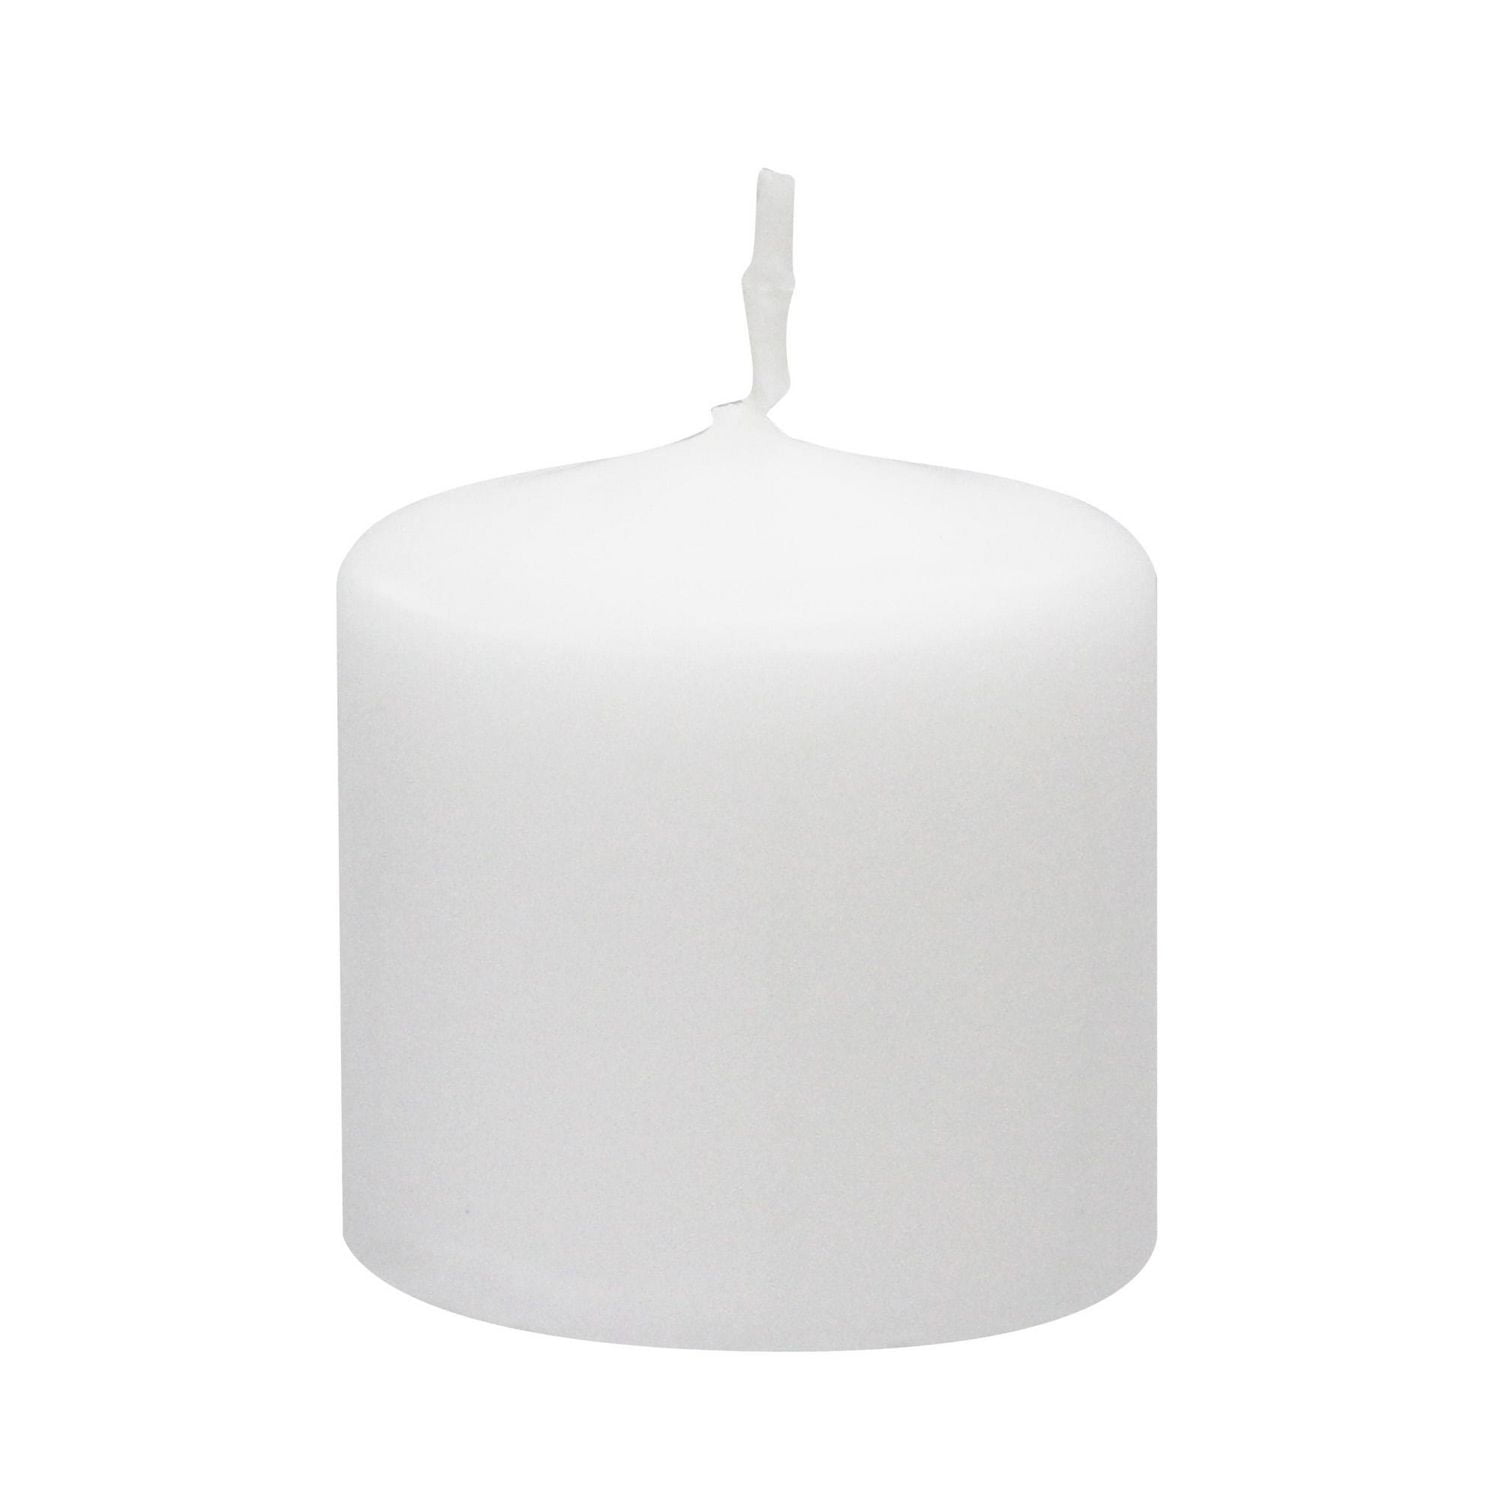 Mainstays 21PK Unscented Votive Candles, Pack of 21 